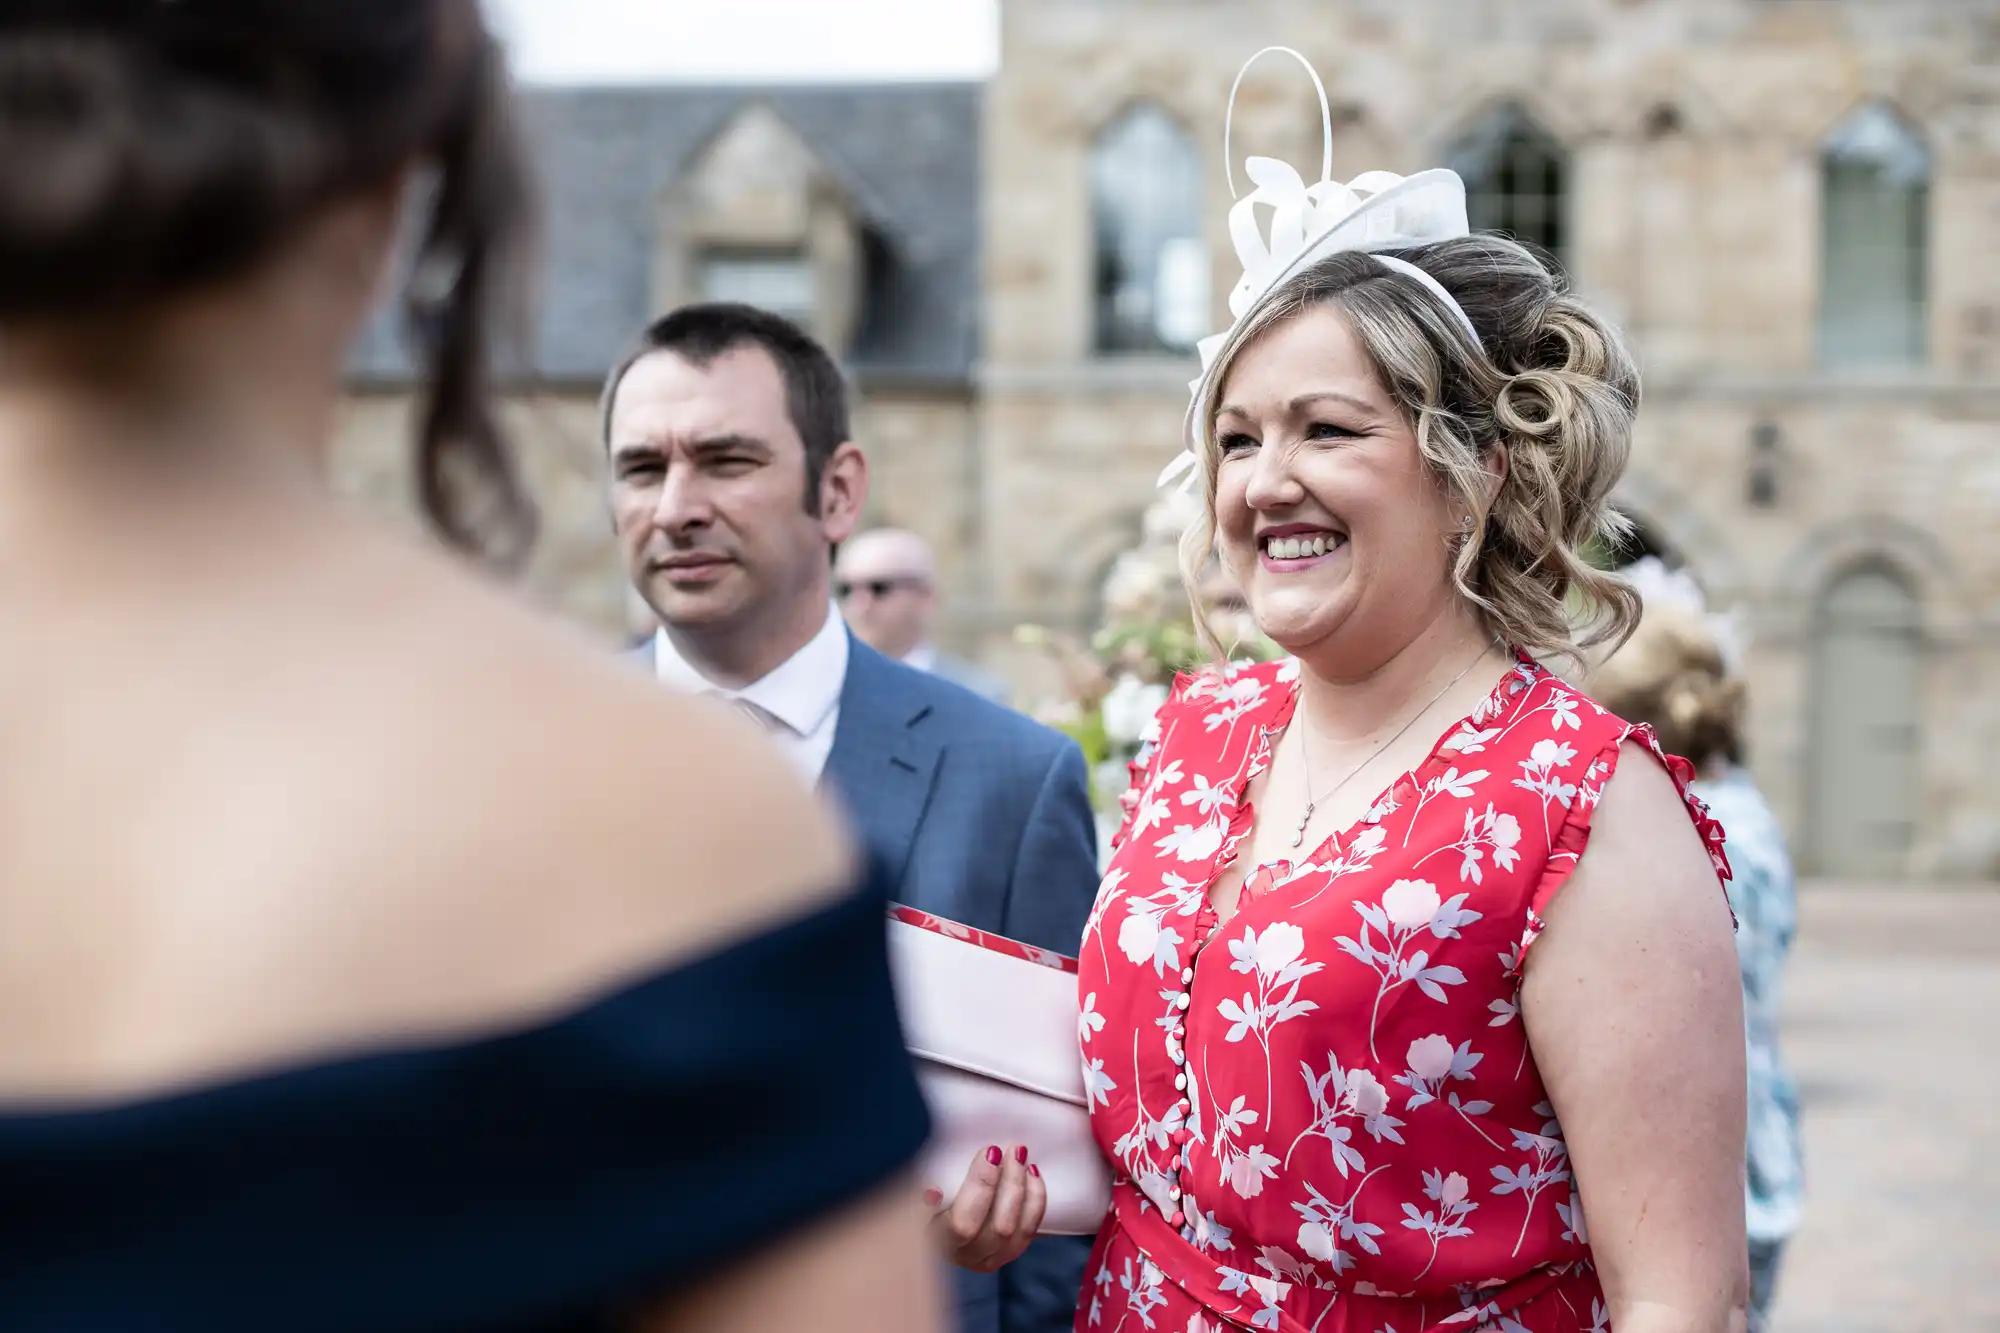 A smiling woman in a red floral dress and white fascinator at an outdoor wedding ceremony, with others around her.